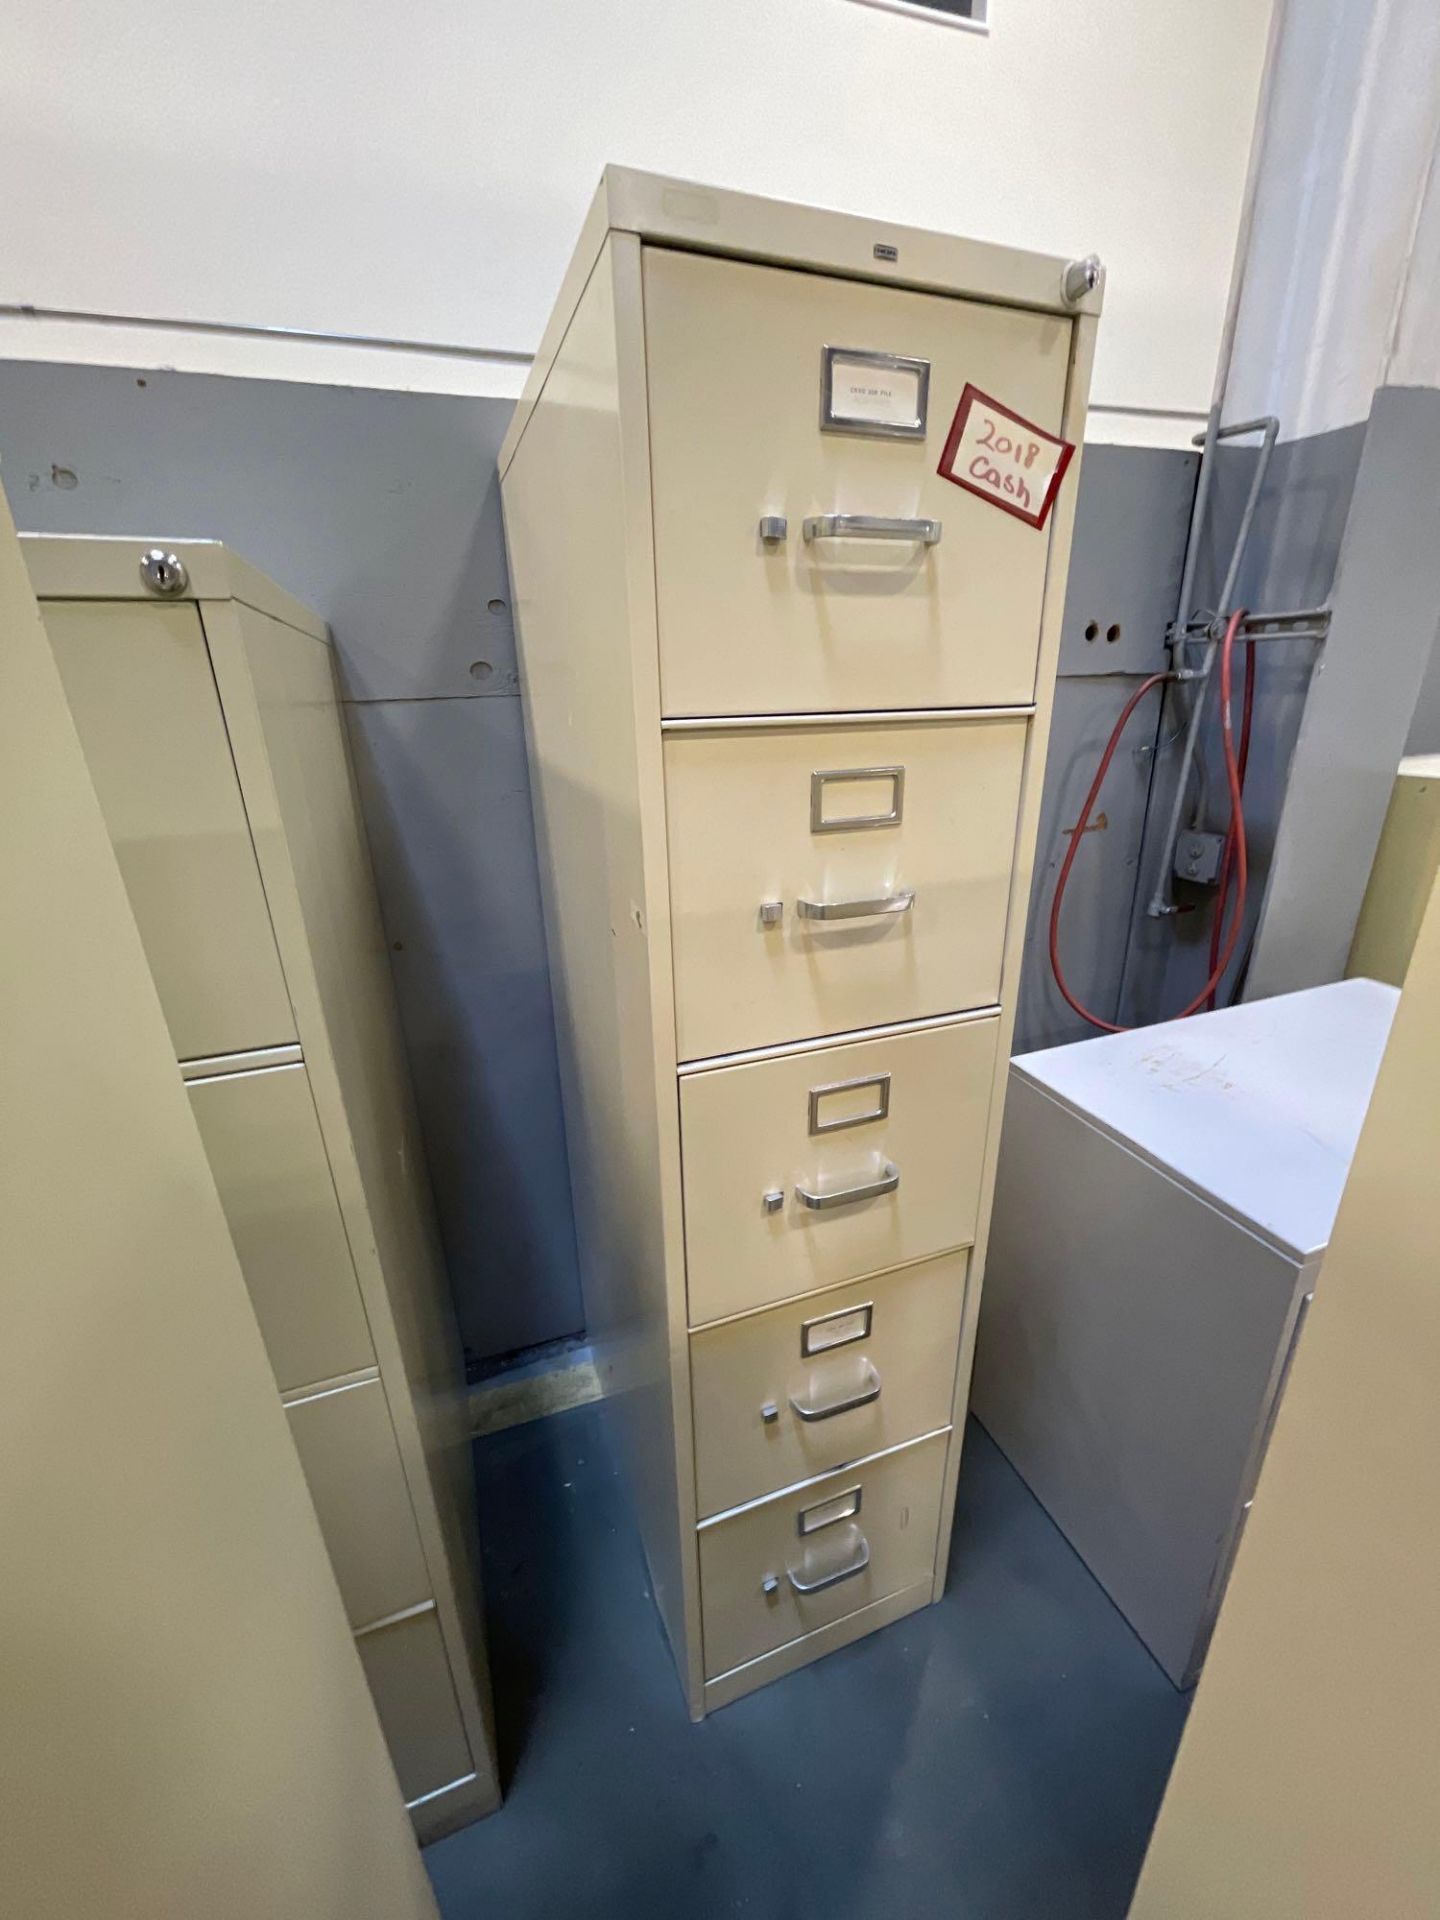 Lot of 6 Hon File Cabinets: (3) 29" X 15" X 52", (2) 26" X 18" X 52", (1) 26" X 15" X 60" - Image 7 of 7